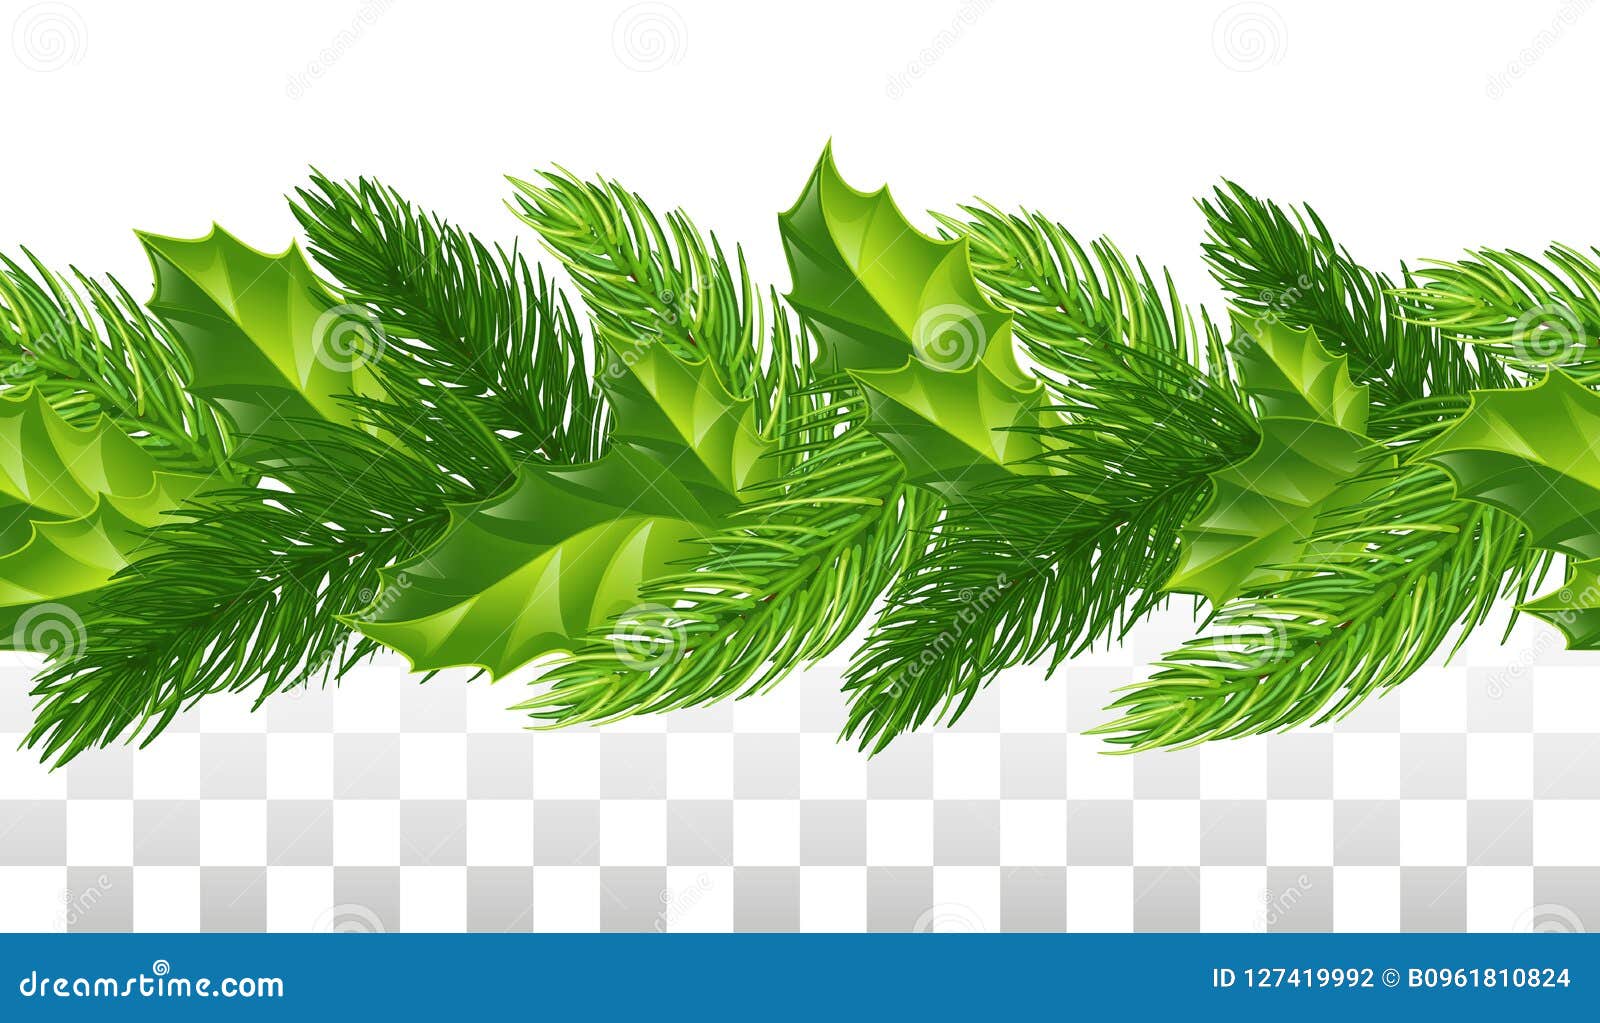 Christmas Branch Holly Twig Pine Stems Stock Vector (Royalty Free)  2215110553